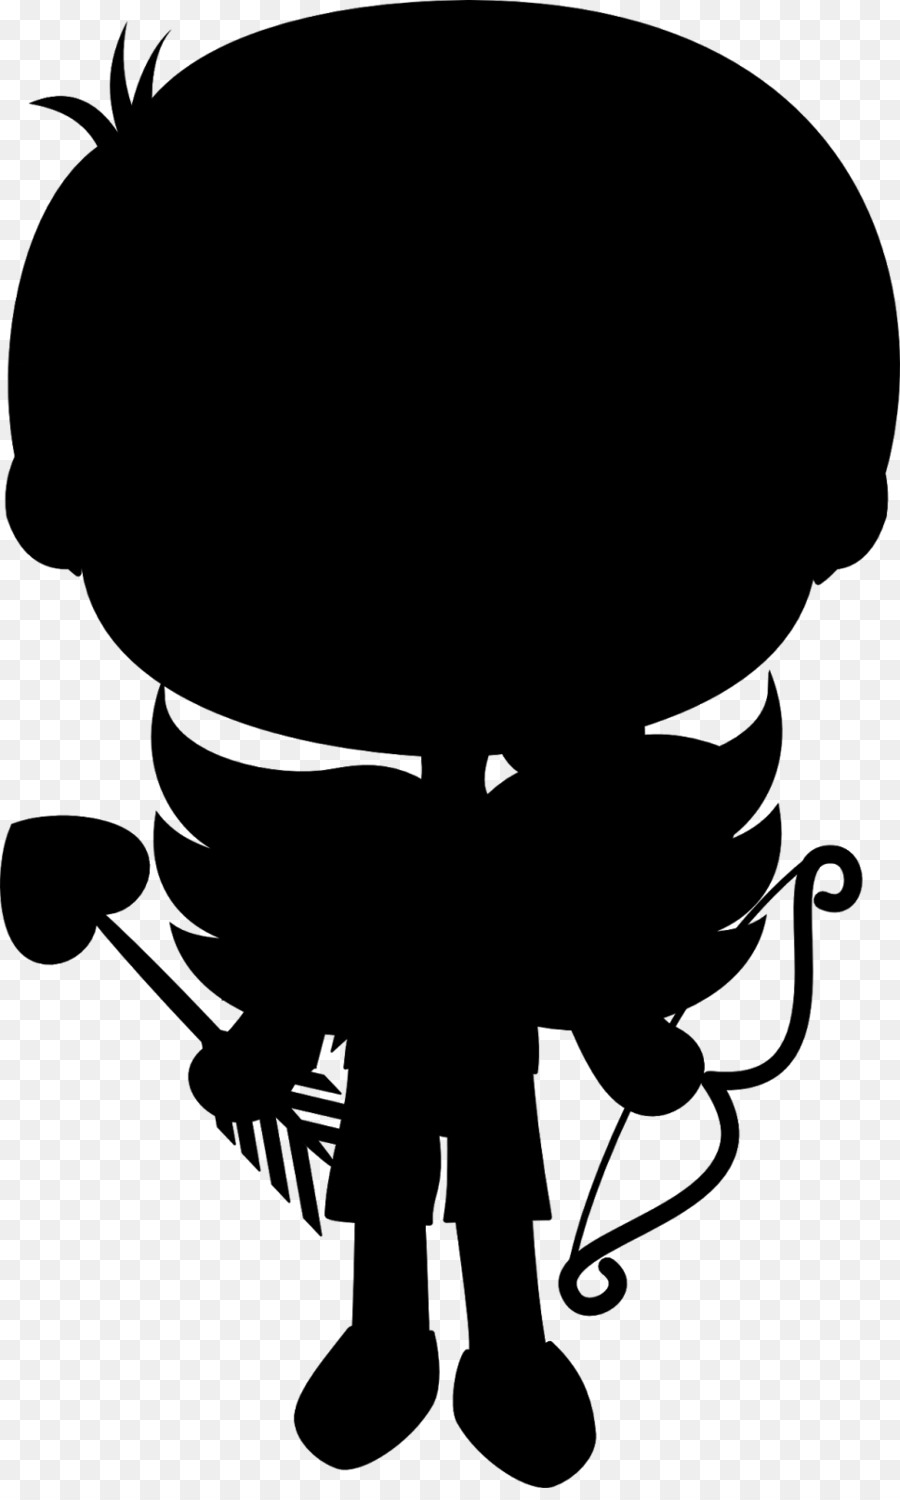 Clip art Illustration Cartoon Silhouette Character -  png download - 968*1600 - Free Transparent  Cartoon png Download.